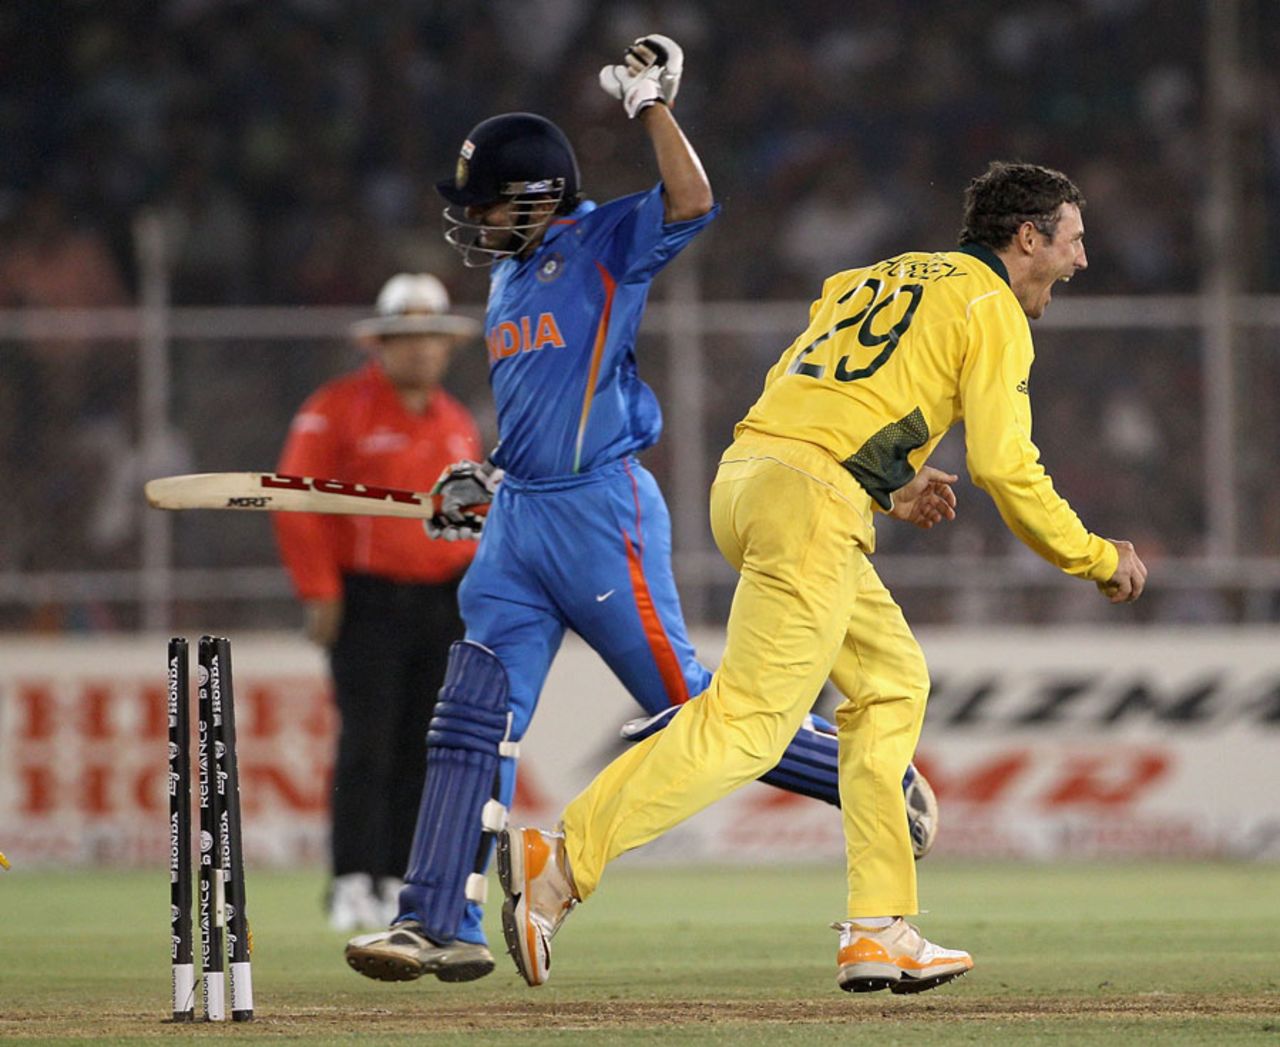 Gautam Gambhir gestures angrily after being run out, India v Australia, 2nd quarter-final, Ahmedabad, World Cup 2011, March 24, 2011